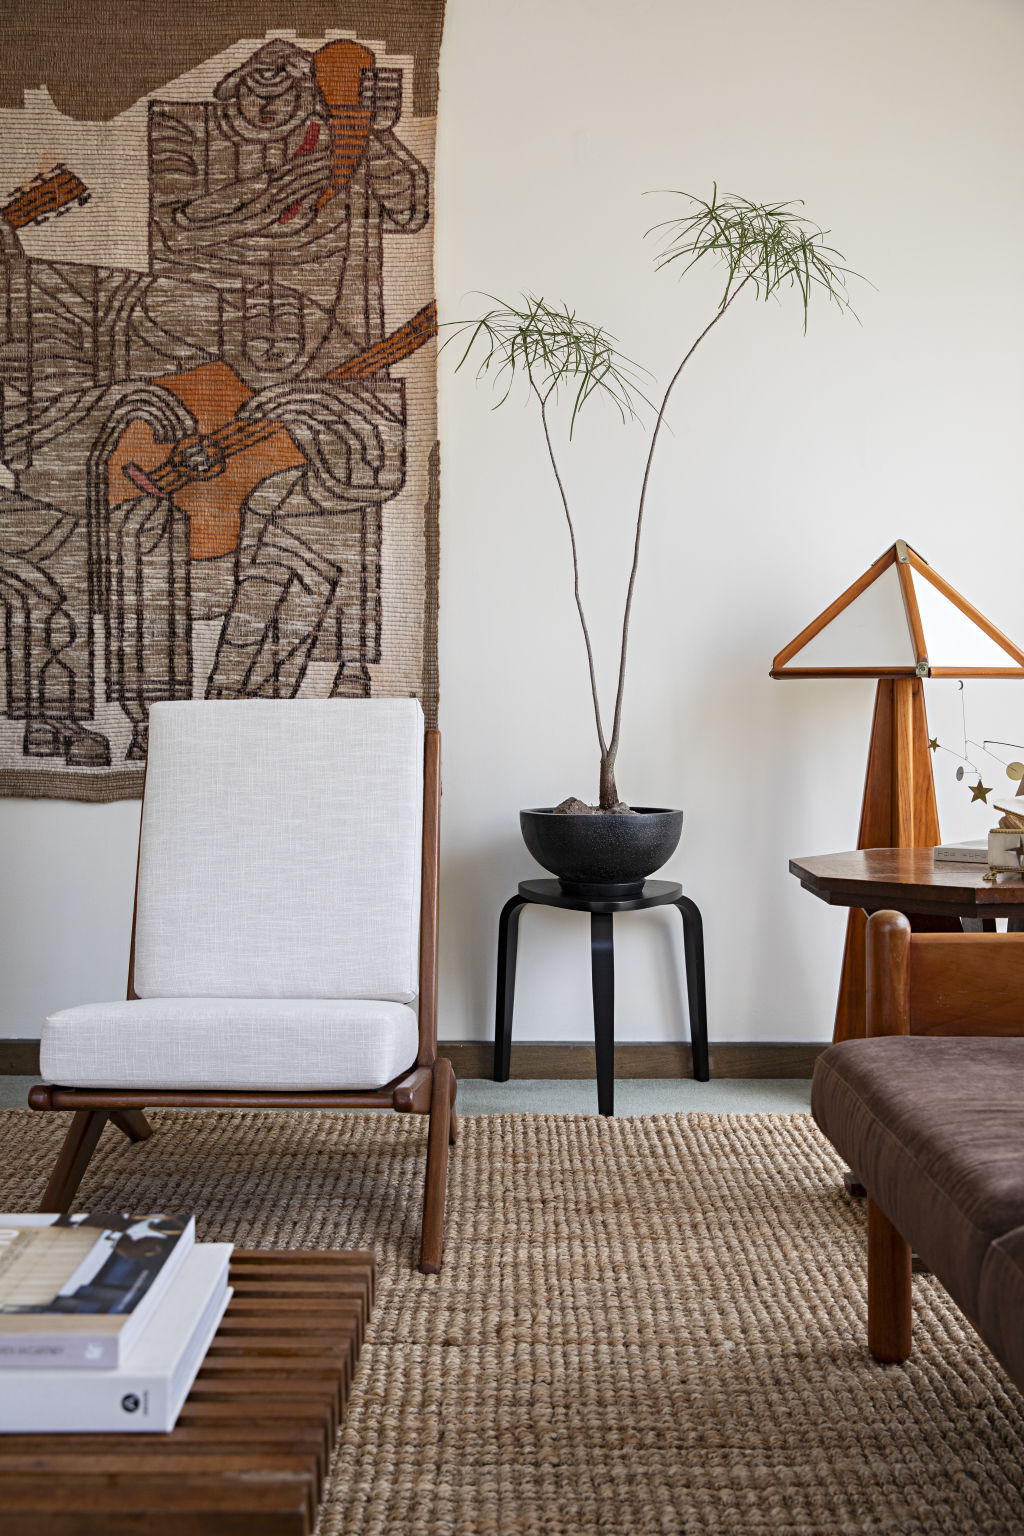 Every piece in the home tells a story. Photo: Natalie Jeffcott